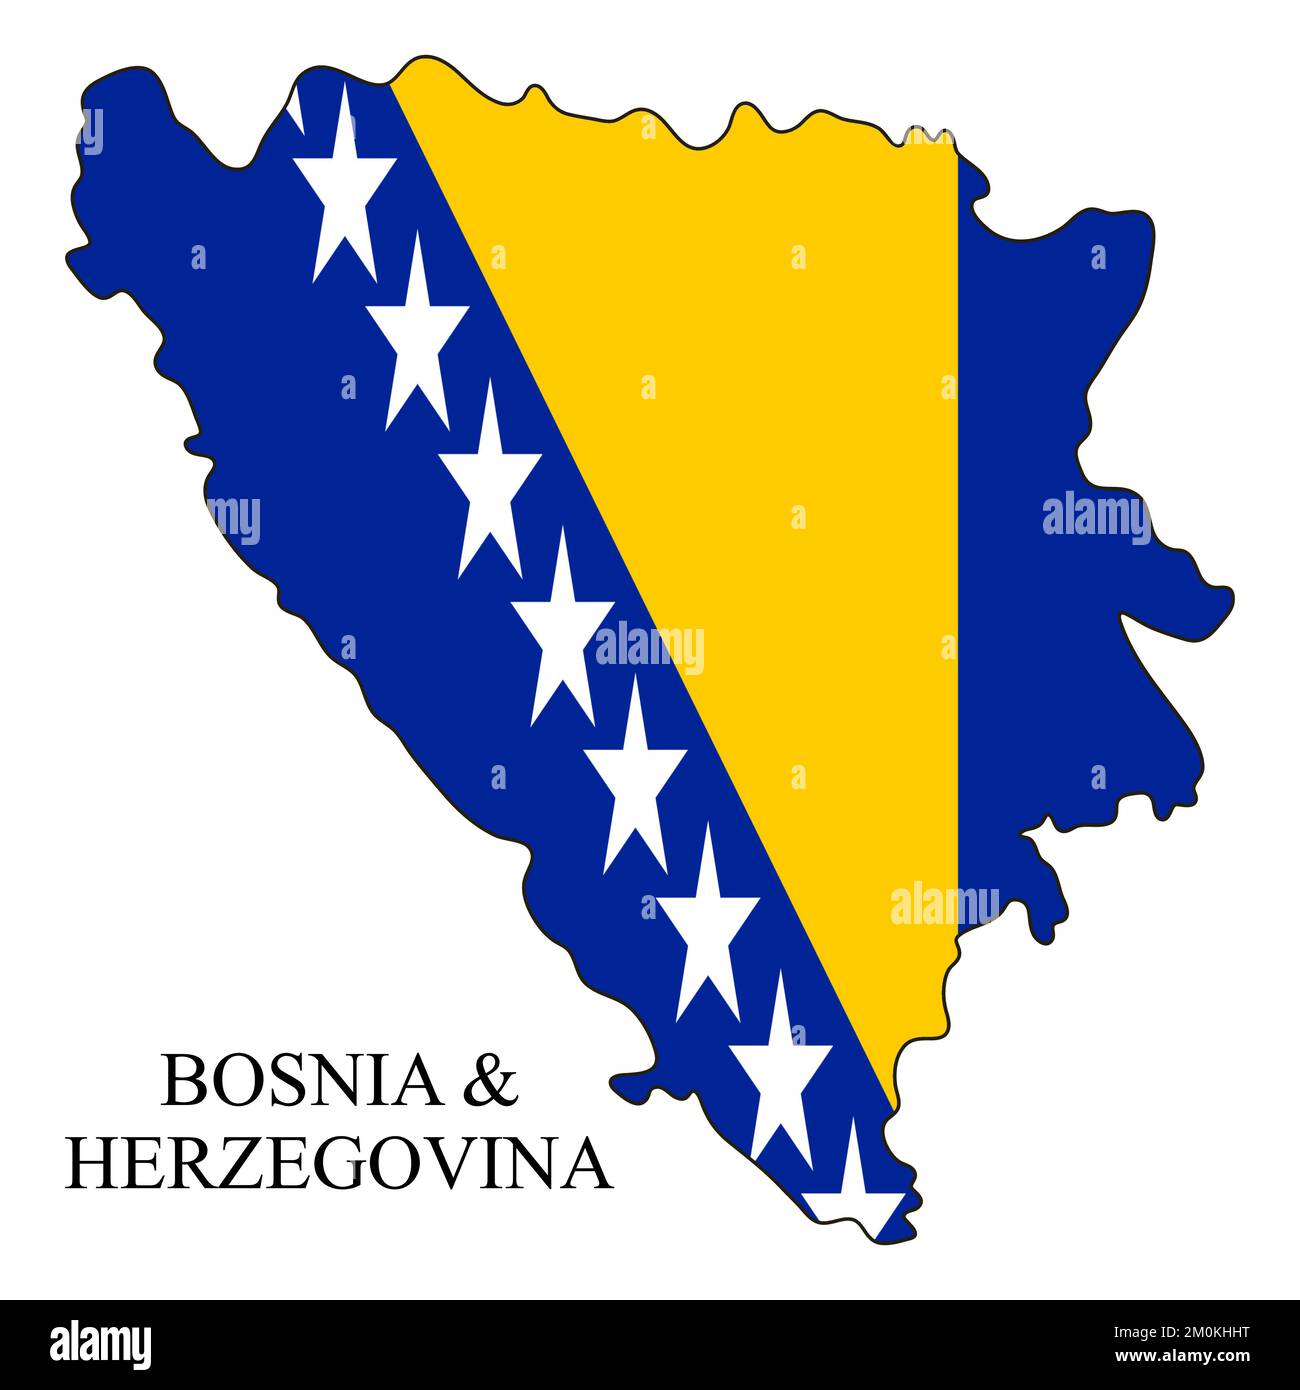 Bosnia and Herzegovina map vector illustration. Global economy. Famous country. Southern Europe. Europe. Stock Vector